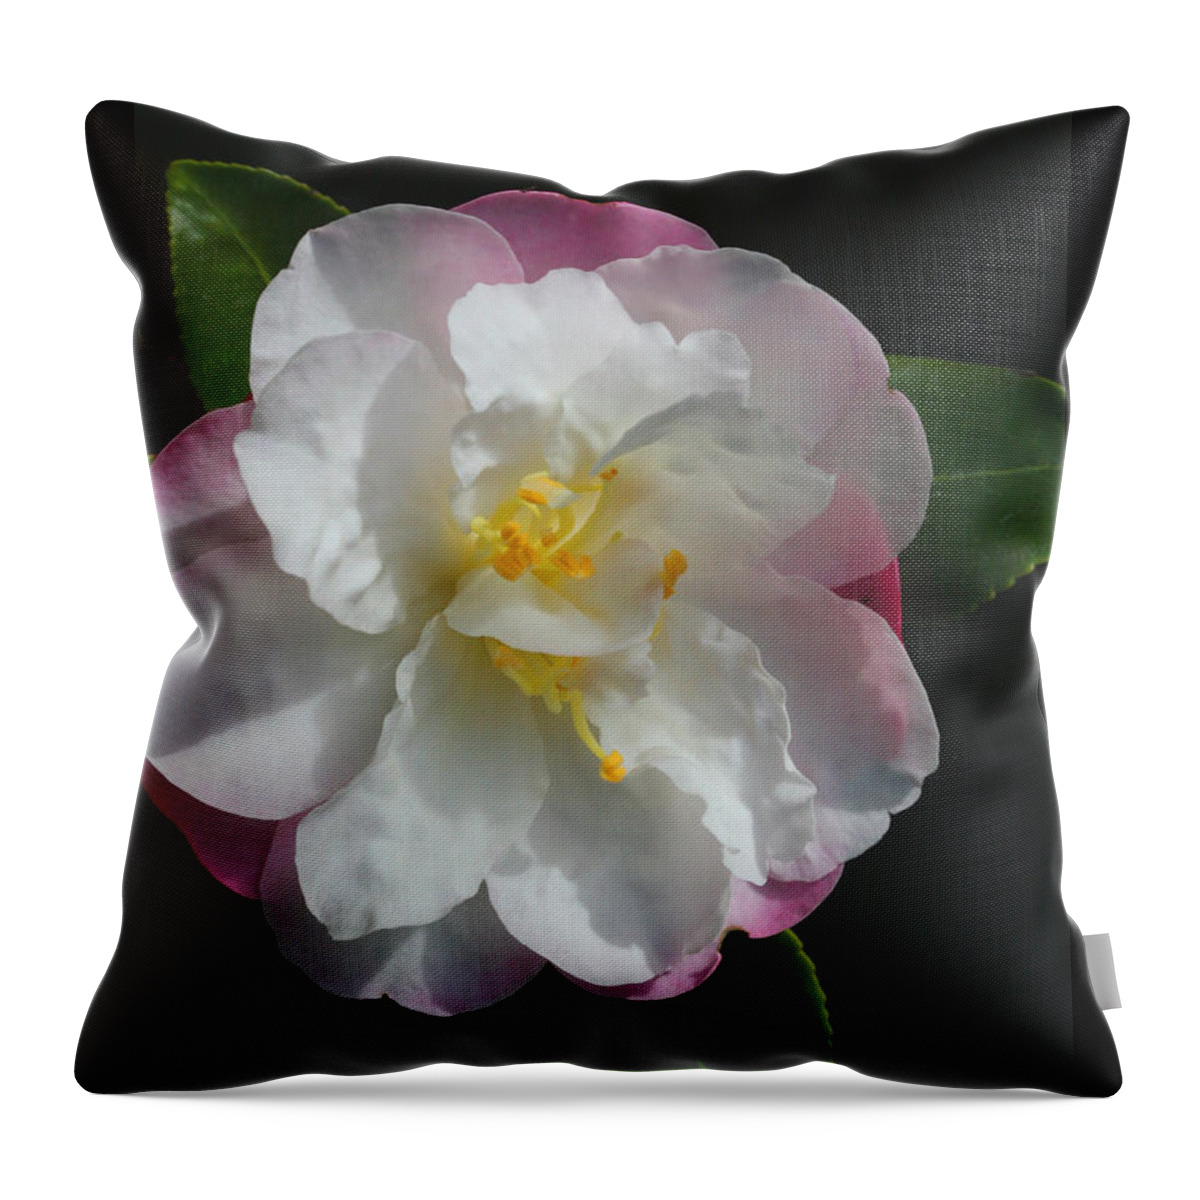 Little Pearl Camellia Throw Pillow featuring the photograph Little Pearl Camellia by Tammy Pool